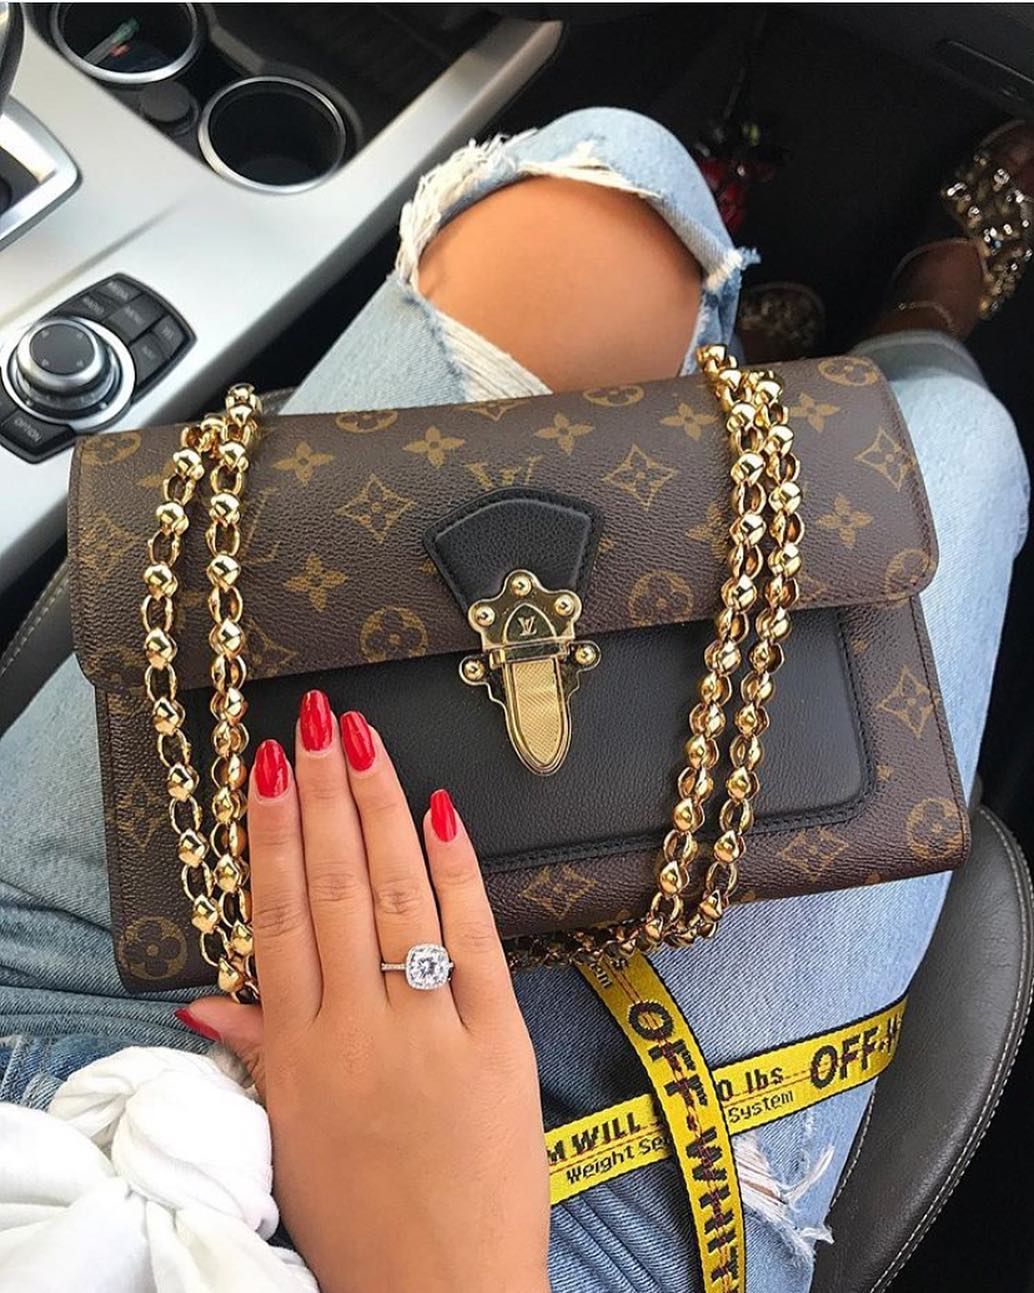 A Louis Vuitton handbag is now cheaper to buy in London than anywhere else